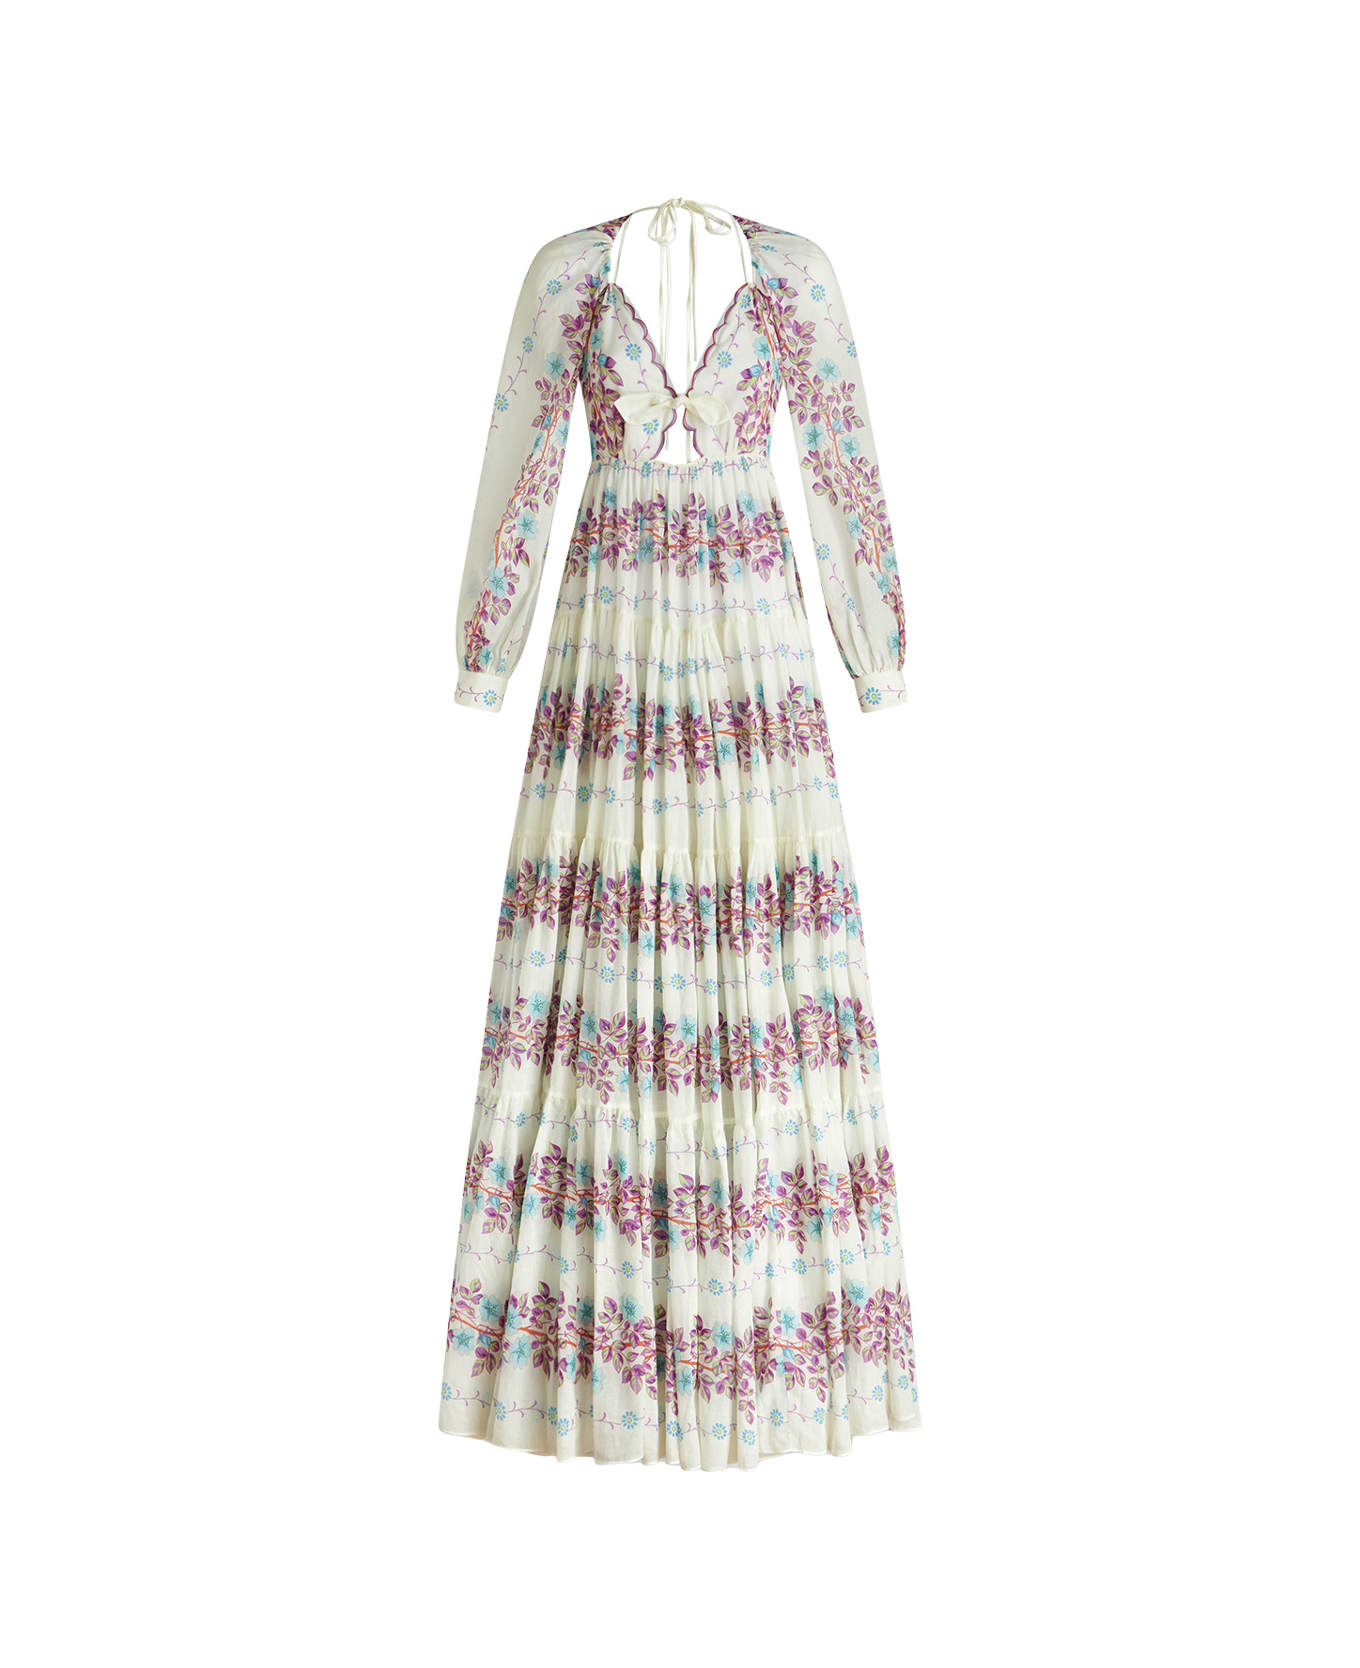 Etro White Maxi Dress With Cut-out And Floral Print - White